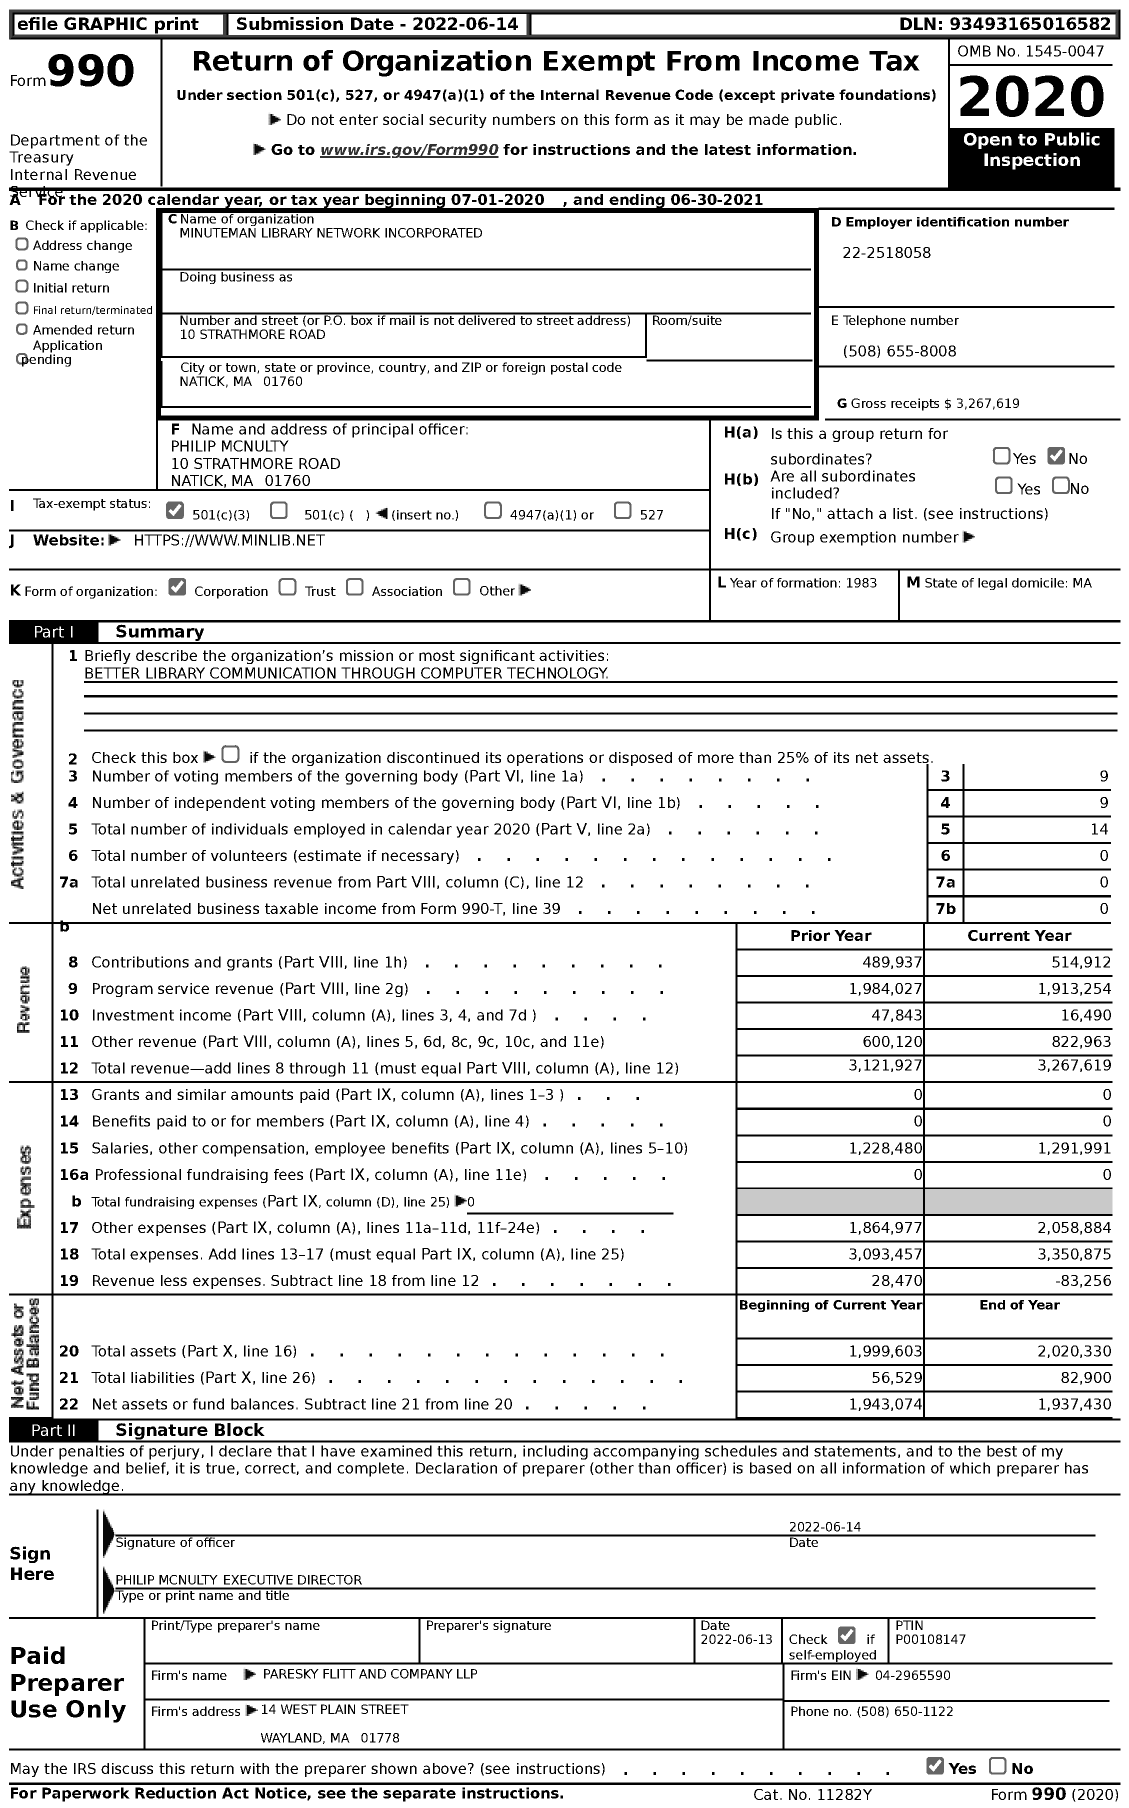 Image of first page of 2020 Form 990 for Minuteman Library Network Incorporated (MLN)